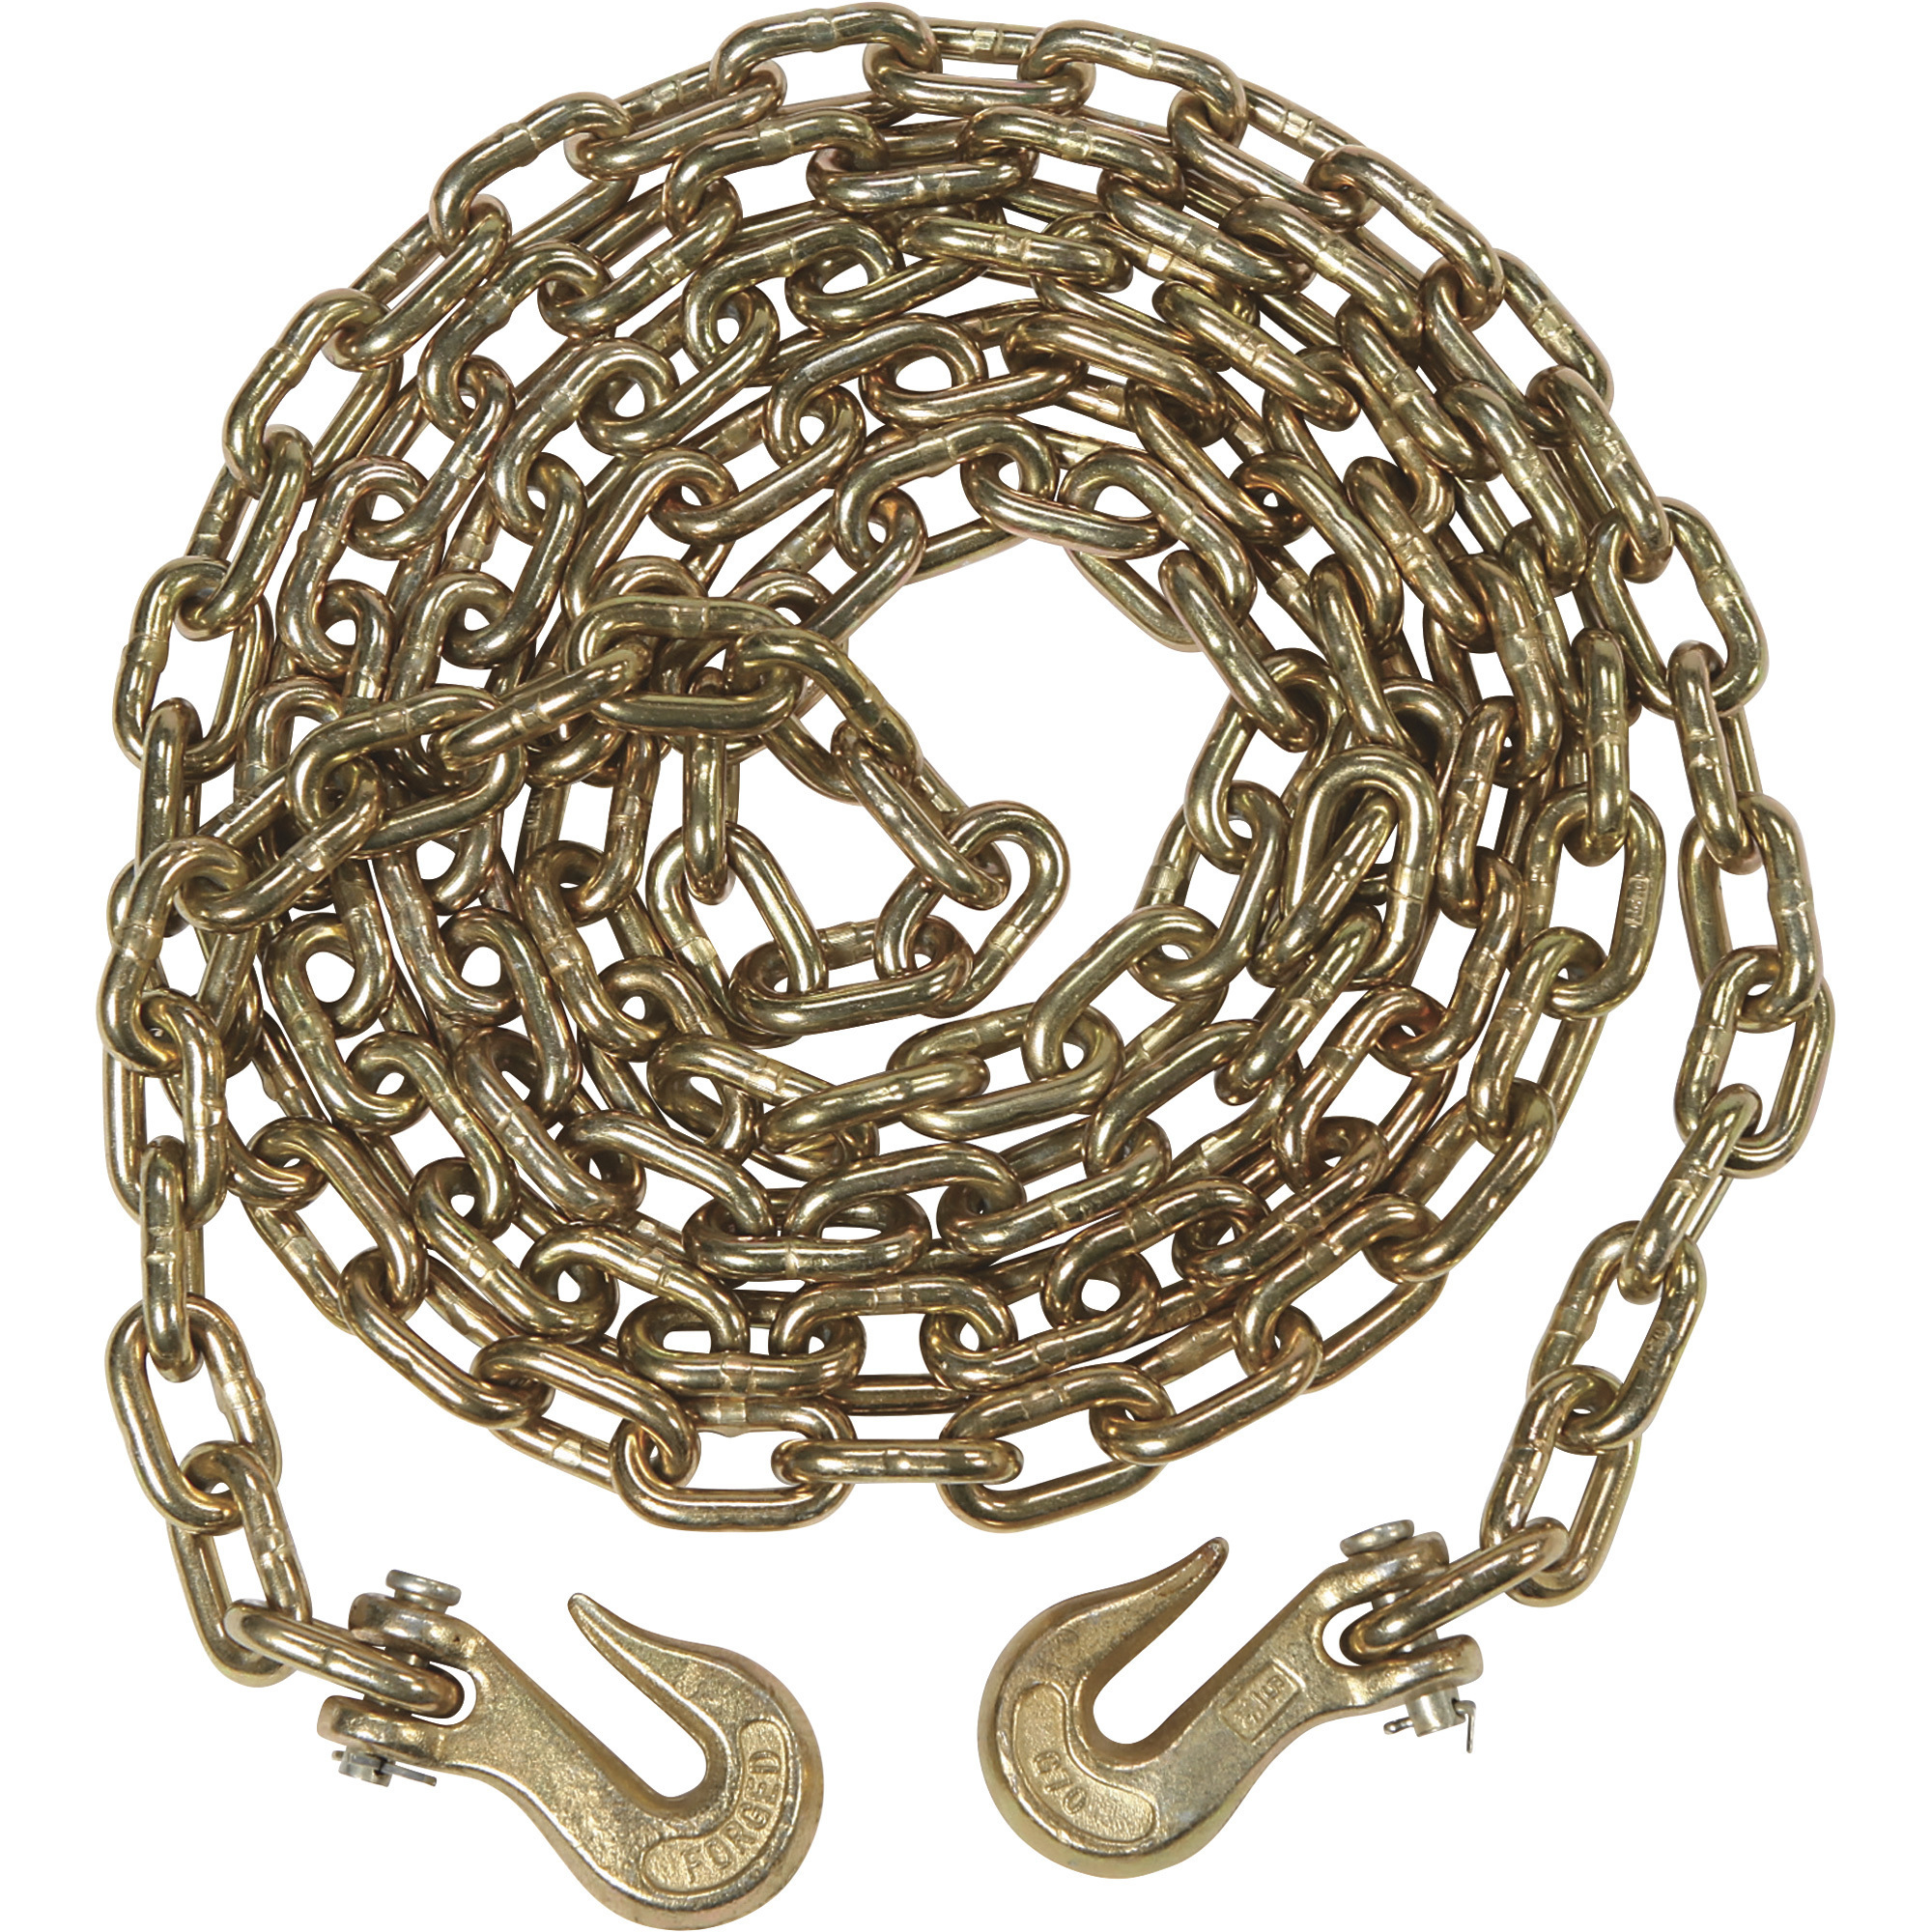 KingChain 5/16Inch x 14ft. Grade 70 (G70) Transport Tow Chain with 5/16Inch Clevis Grab Hooks (x2), 4700 Lbs. Safe Work Load